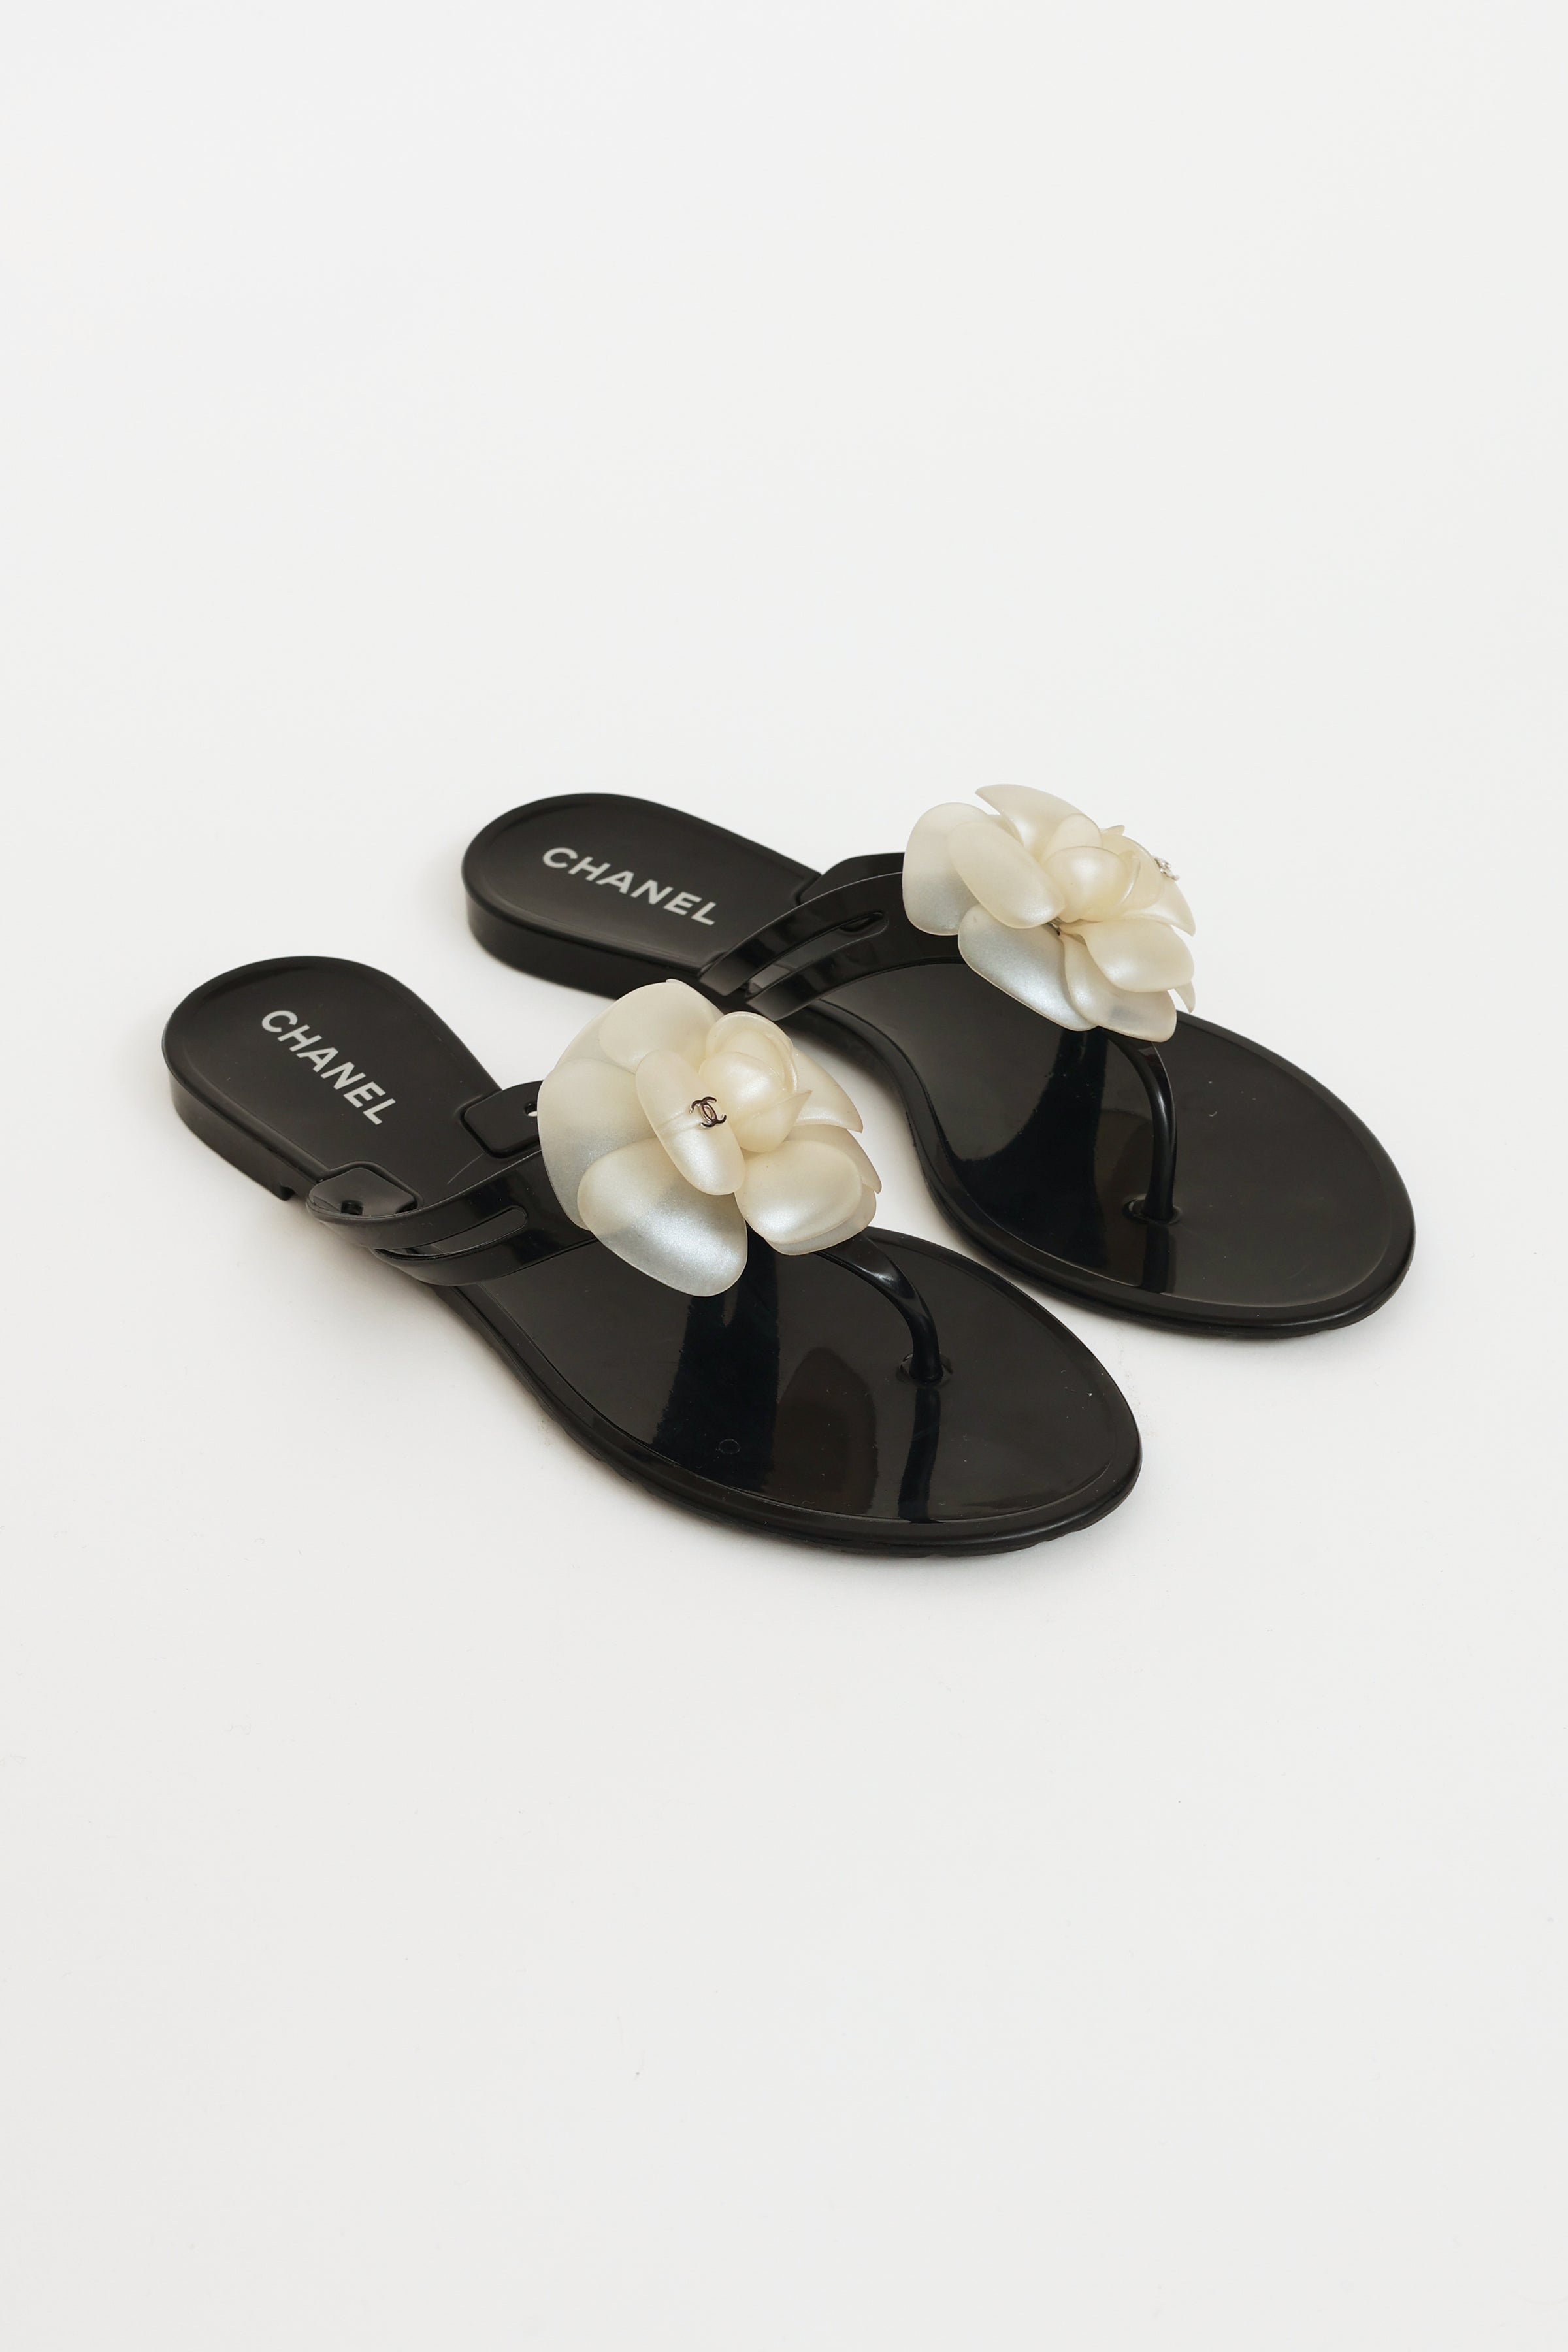 Sold at Auction: Chanel, a pair of Camellia thong sandals